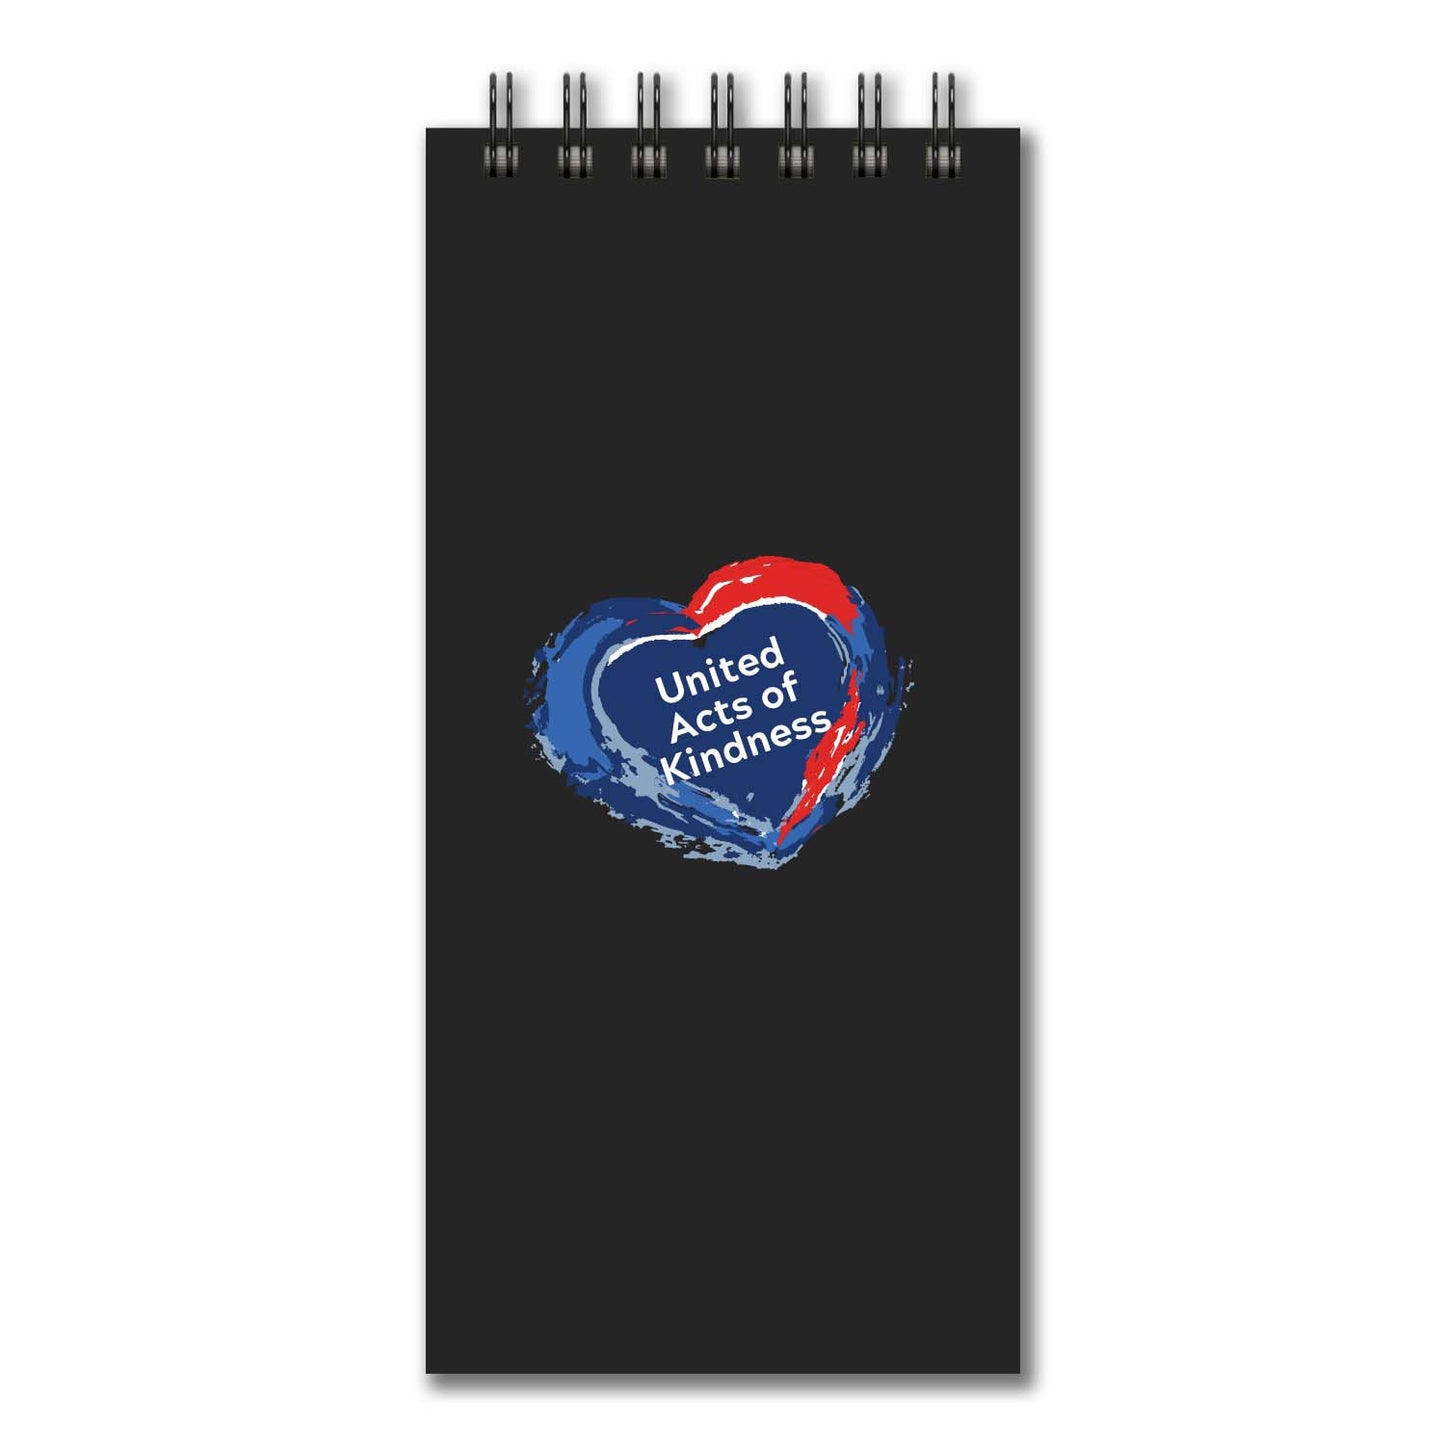 United Acts of Kindness - Reporter Notepad (Pack of 4)